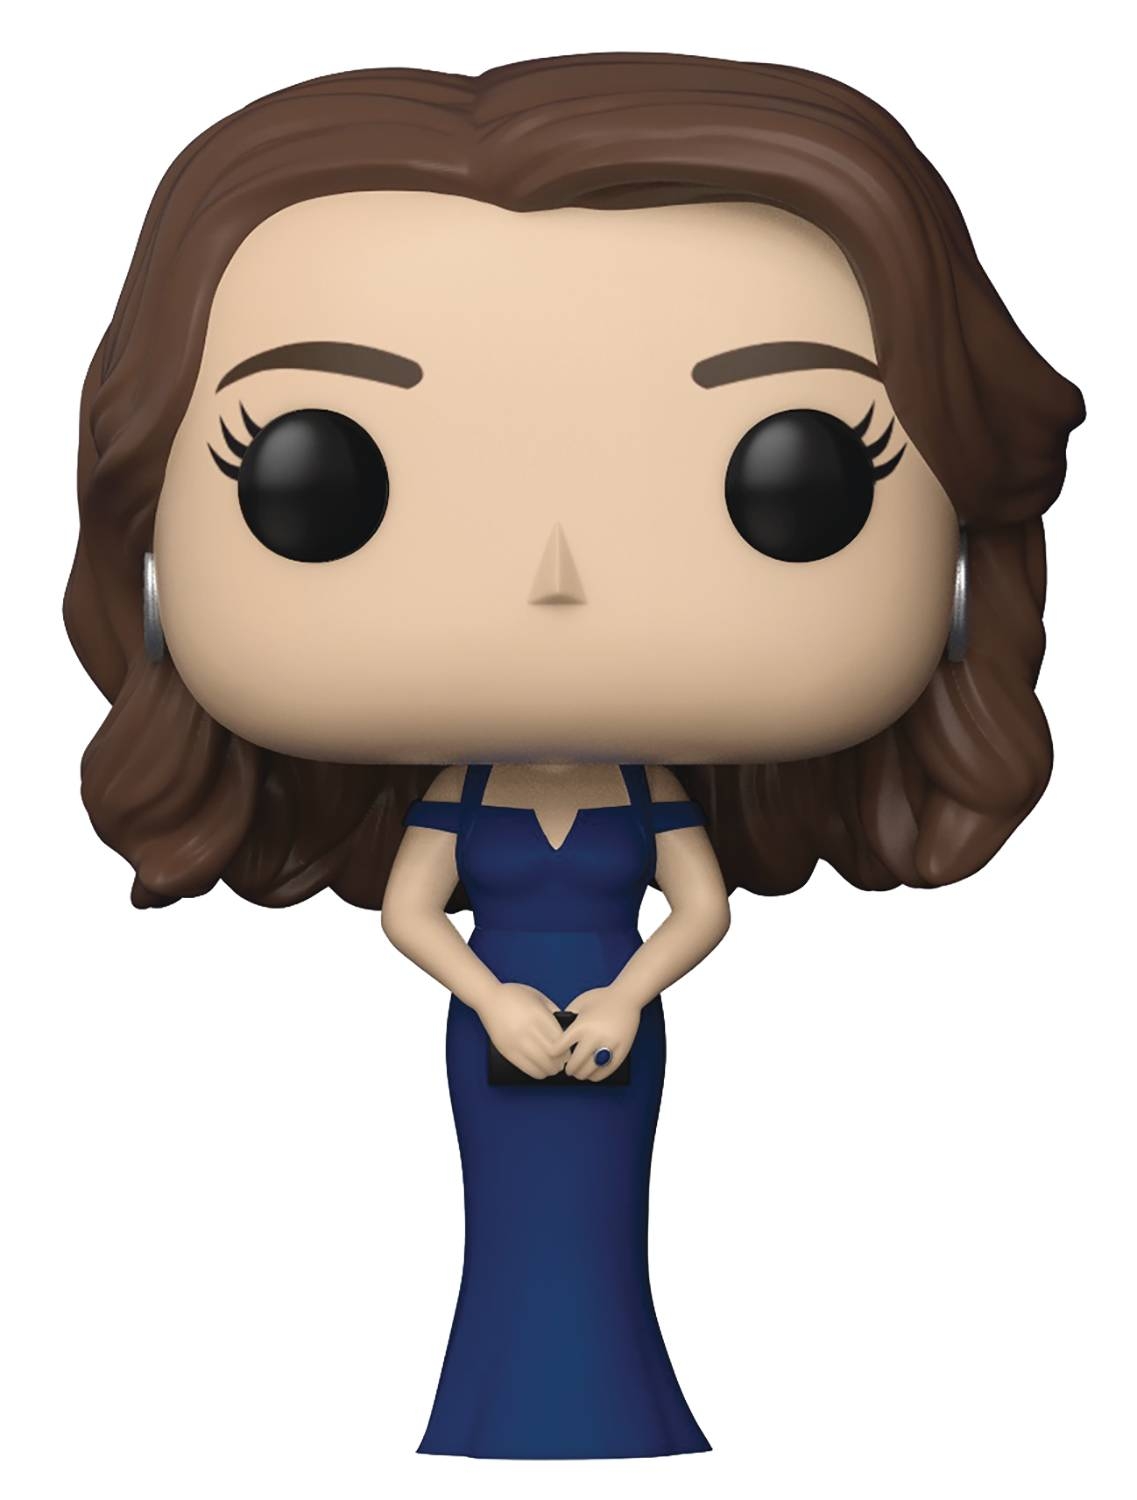 Pop Royal Family Kate Duchess of Cambridge Vinyl Figure (Other) - image 1 of 2